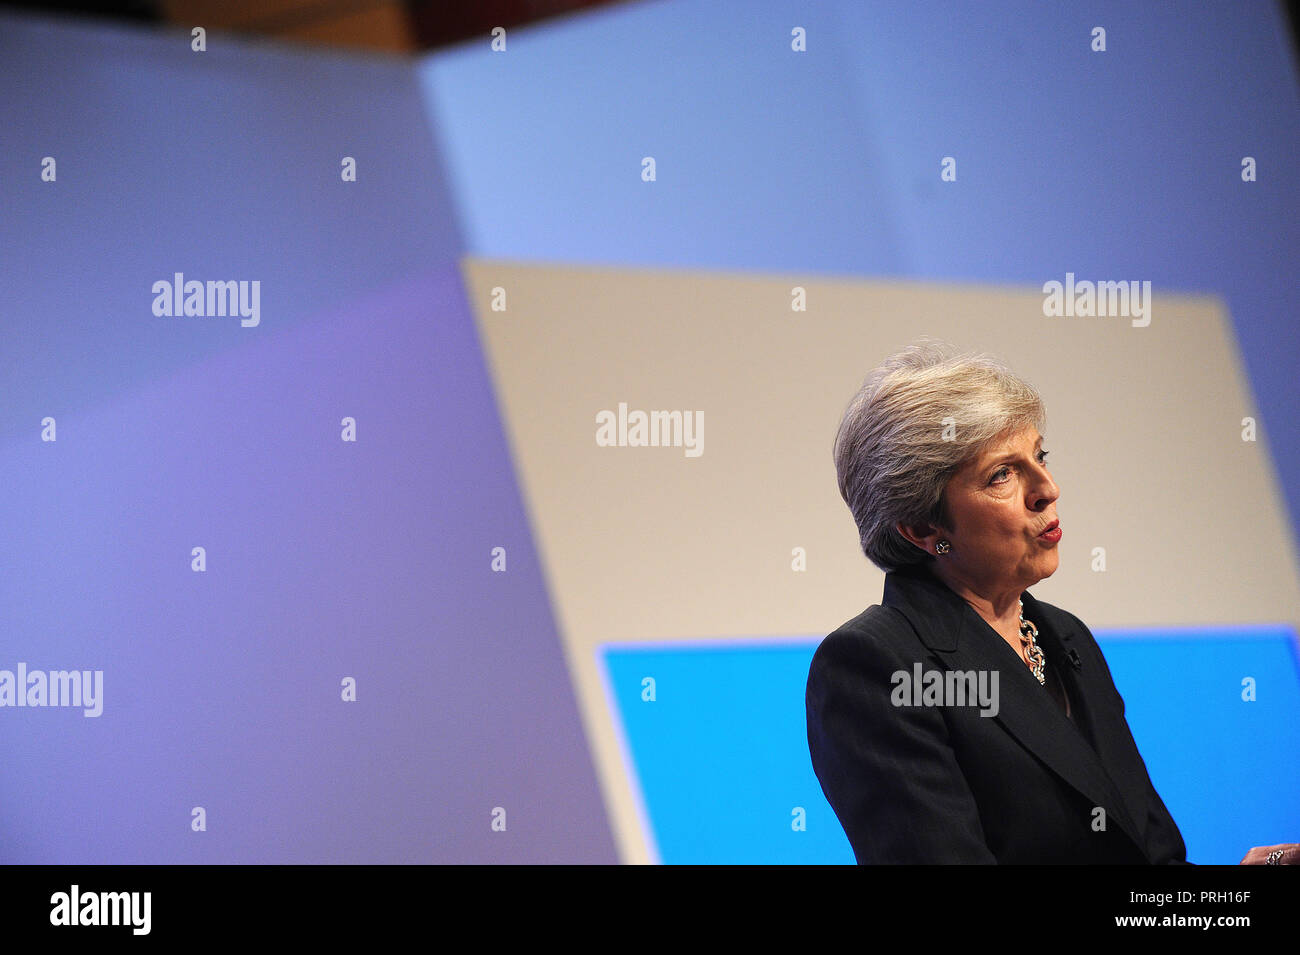 Birmingham, England. 3rd October, 2018.  Theresa May MP, Prime Minister and Leader of the Conservative Party, delivers her keynote speech to conference on the closing session of the fourth day of the Conservative Party annual conference at the ICC.  Kevin Hayes/Alamy Live News Credit: Kevin Hayes/Alamy Live News Stock Photo